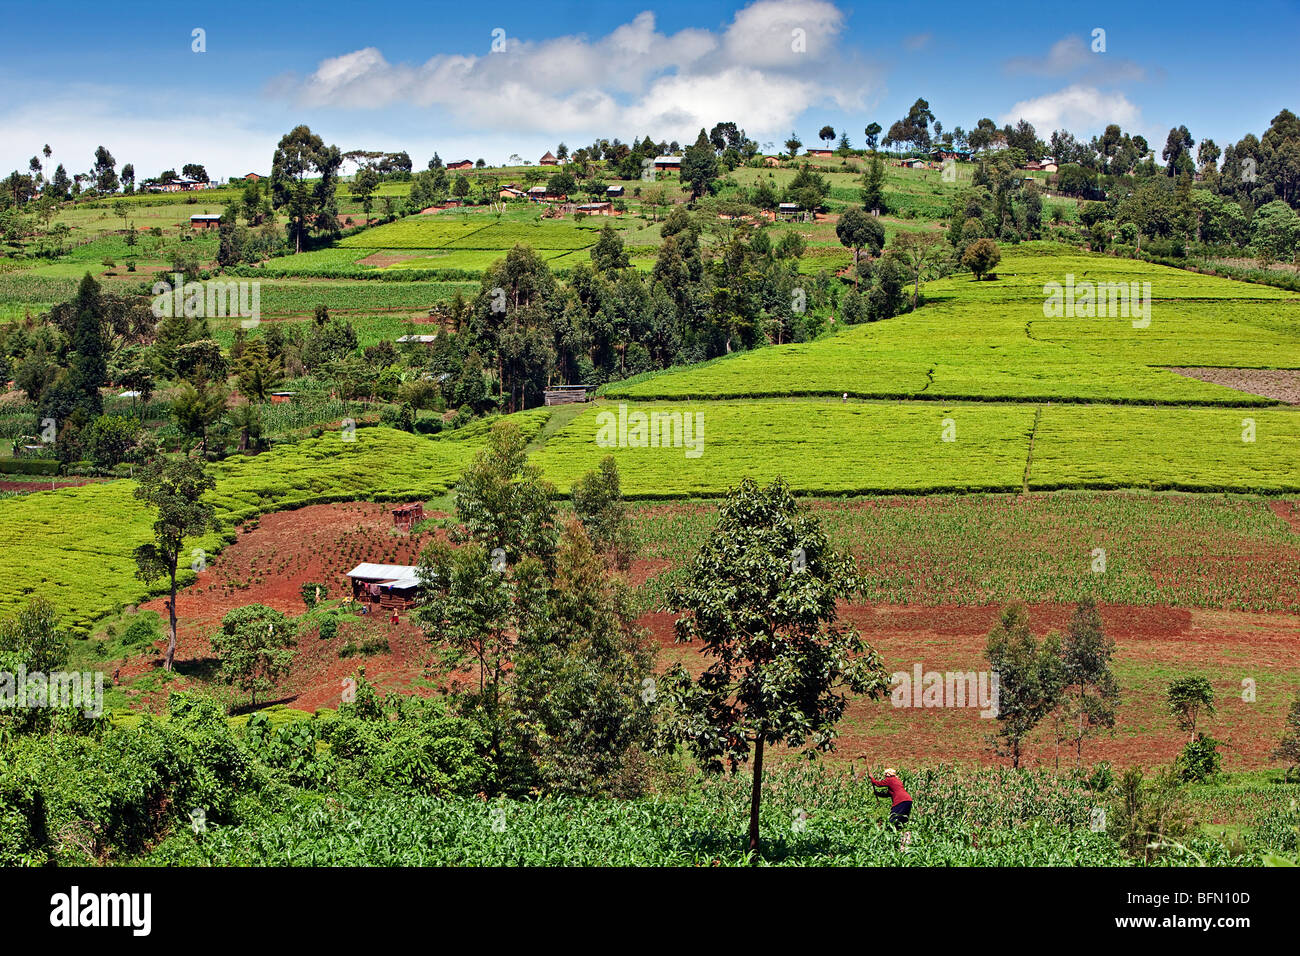 Kenya, Kapsabet District. A rich farming region of Kapsabet District with tea and maize being grown by the local landowners. Stock Photo